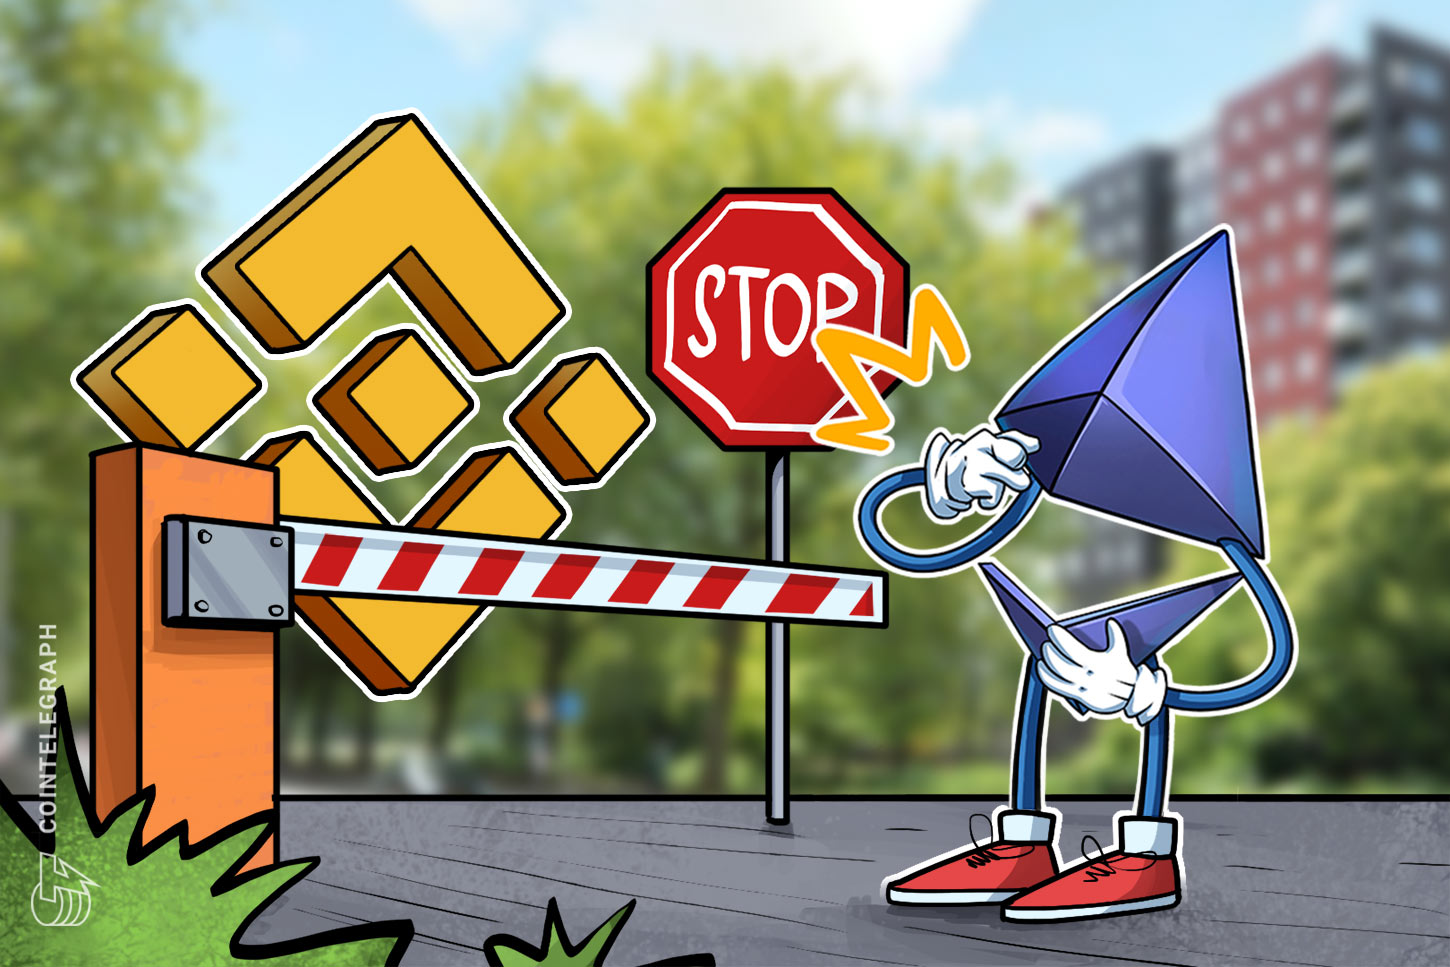 Binance briefly pauses Ethereum withdrawals as community suffers ‘minor hard-fork’